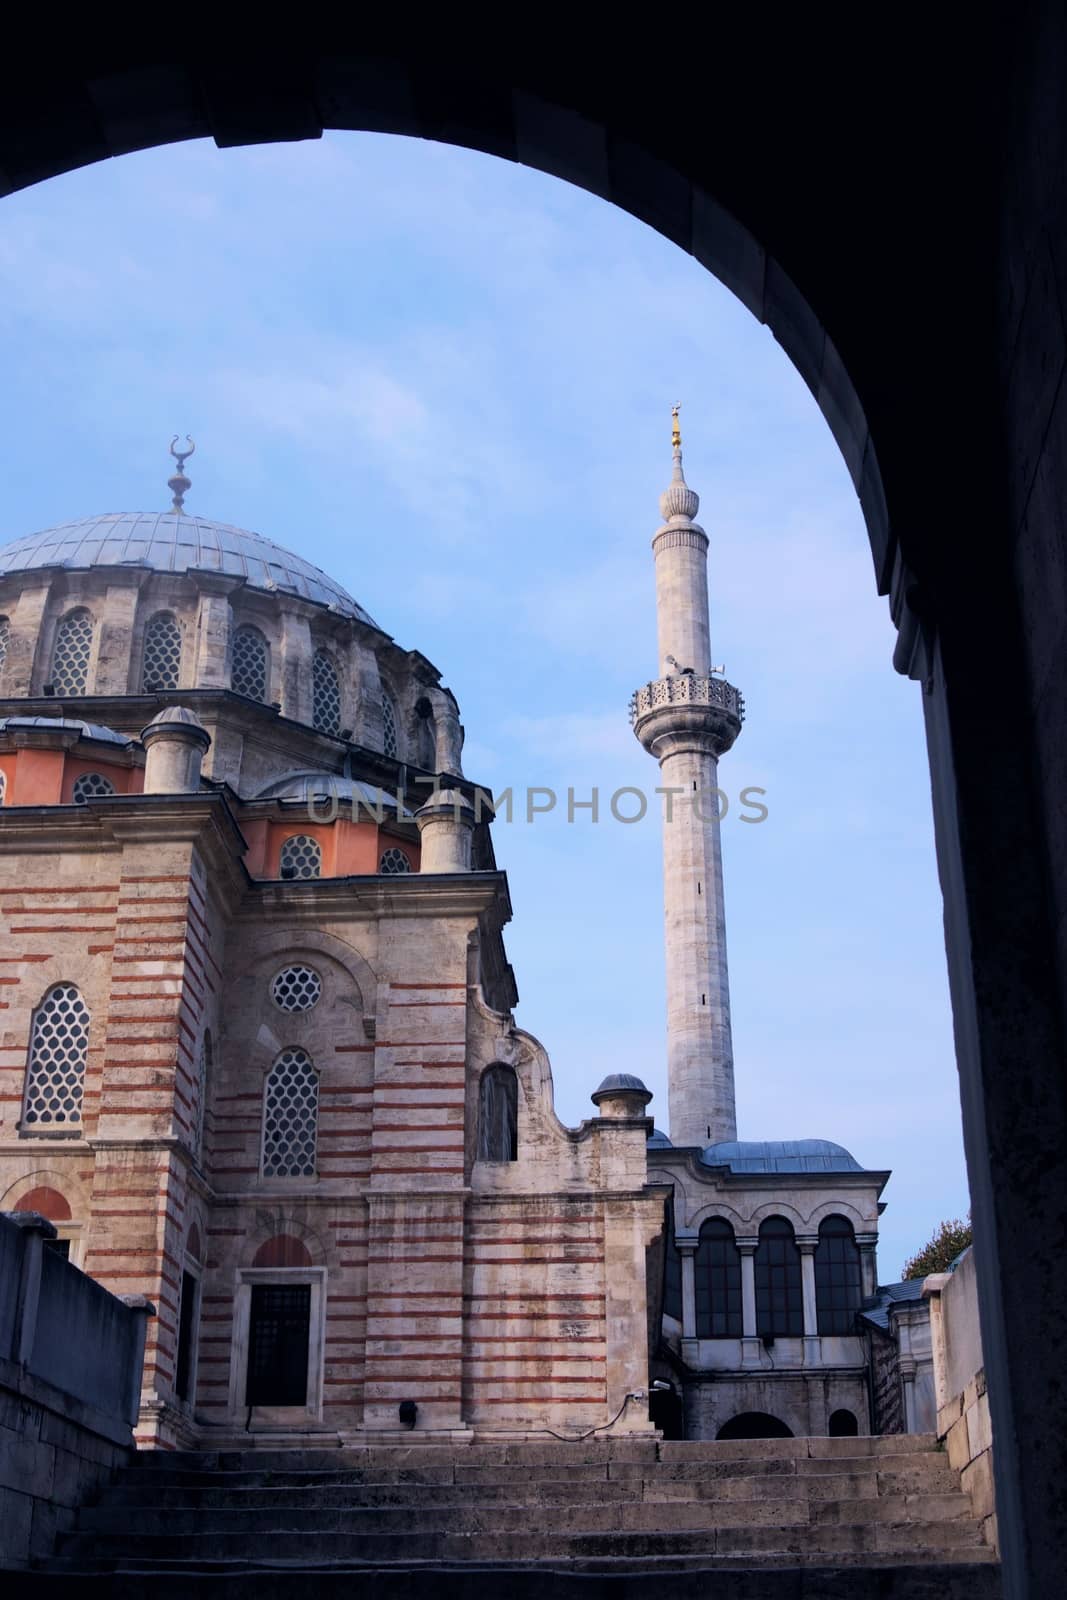 Old mosque in Istanbul, Turkey. Exterior view of the main dome and minarets, taken from the entrance archway. by hernan_hyper